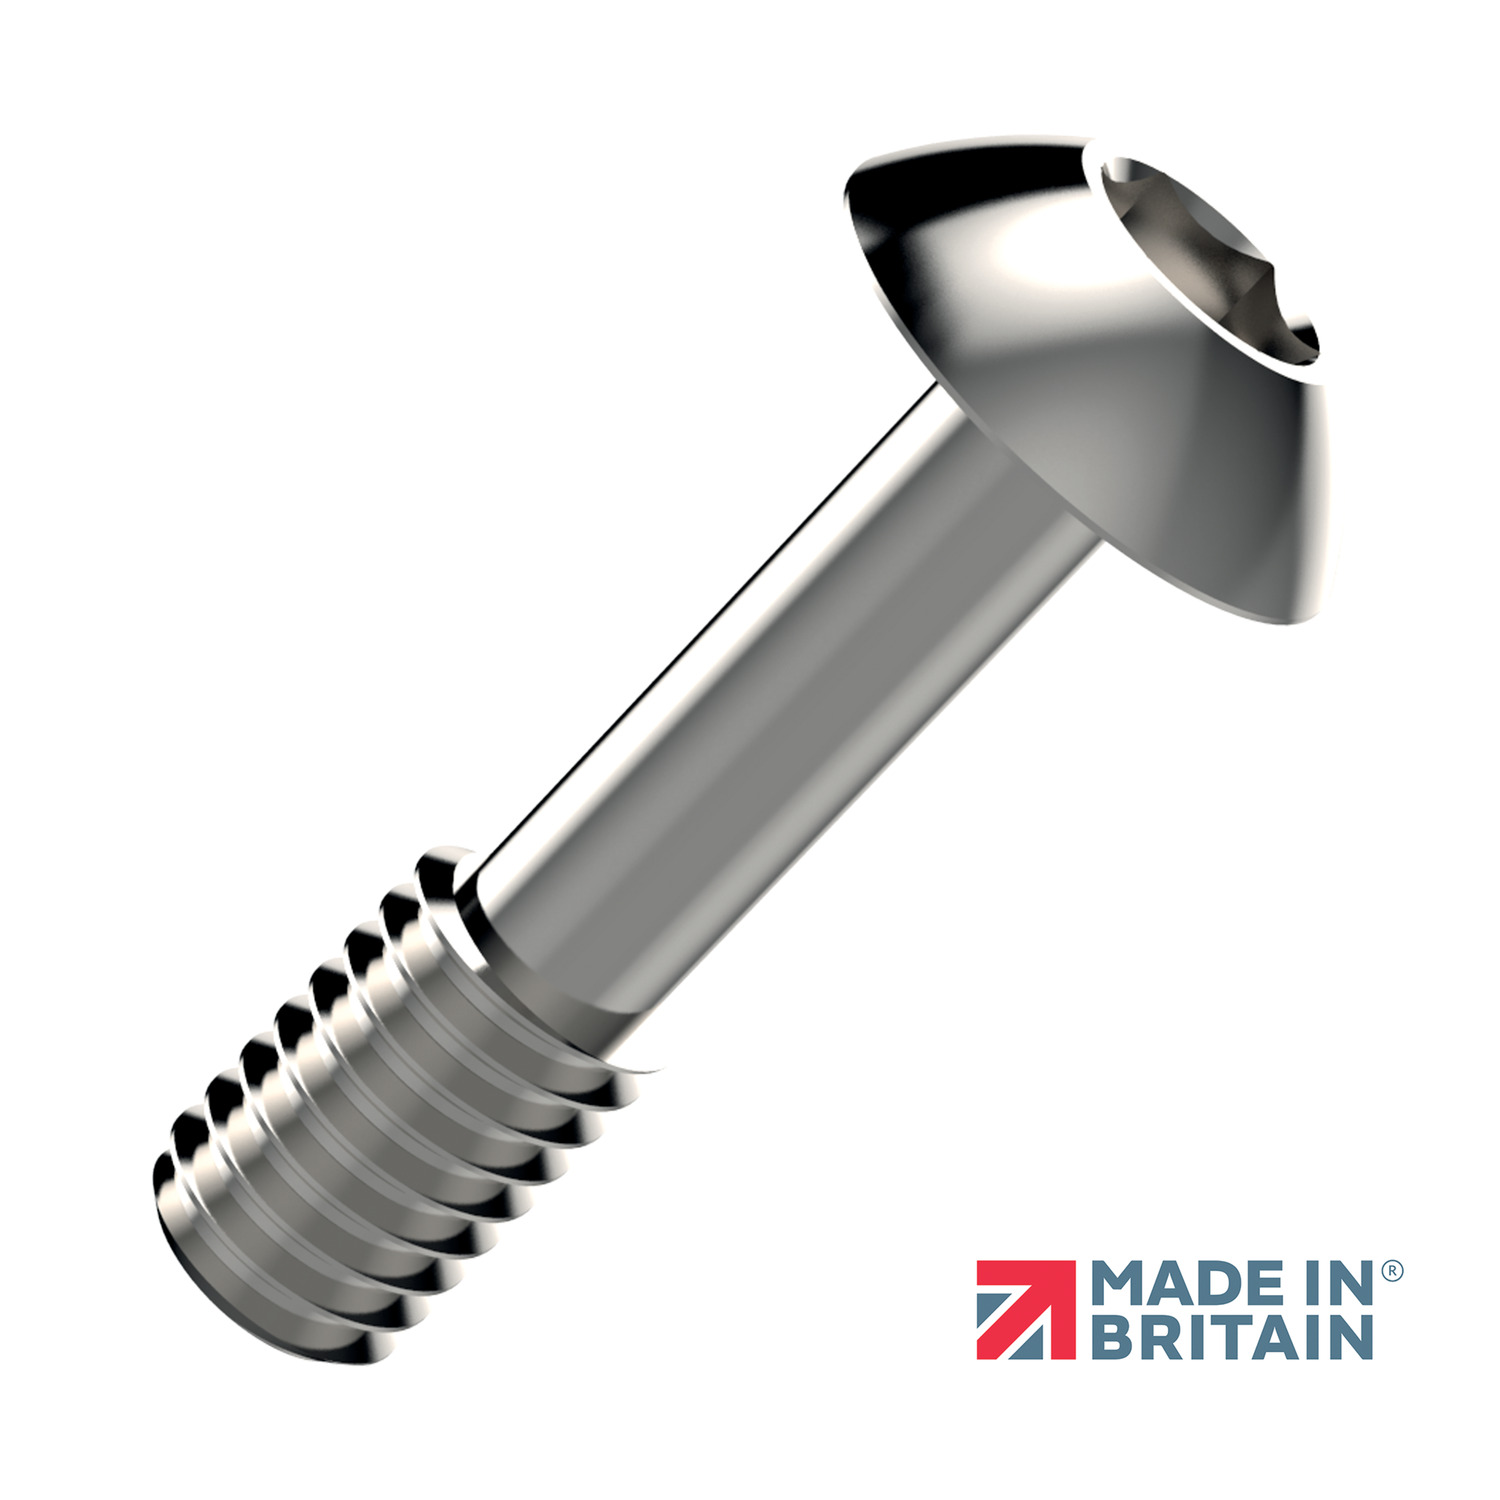 Captive Screws - Button Head Captive button head screws with either hex or TX drive. In AISI 303 stainless steel (A2) and AISI 316 stainless steel for added corrosion resistance (other materials on request). Thread sizes M2.5 to M6, lengths 8mm to 60mm.